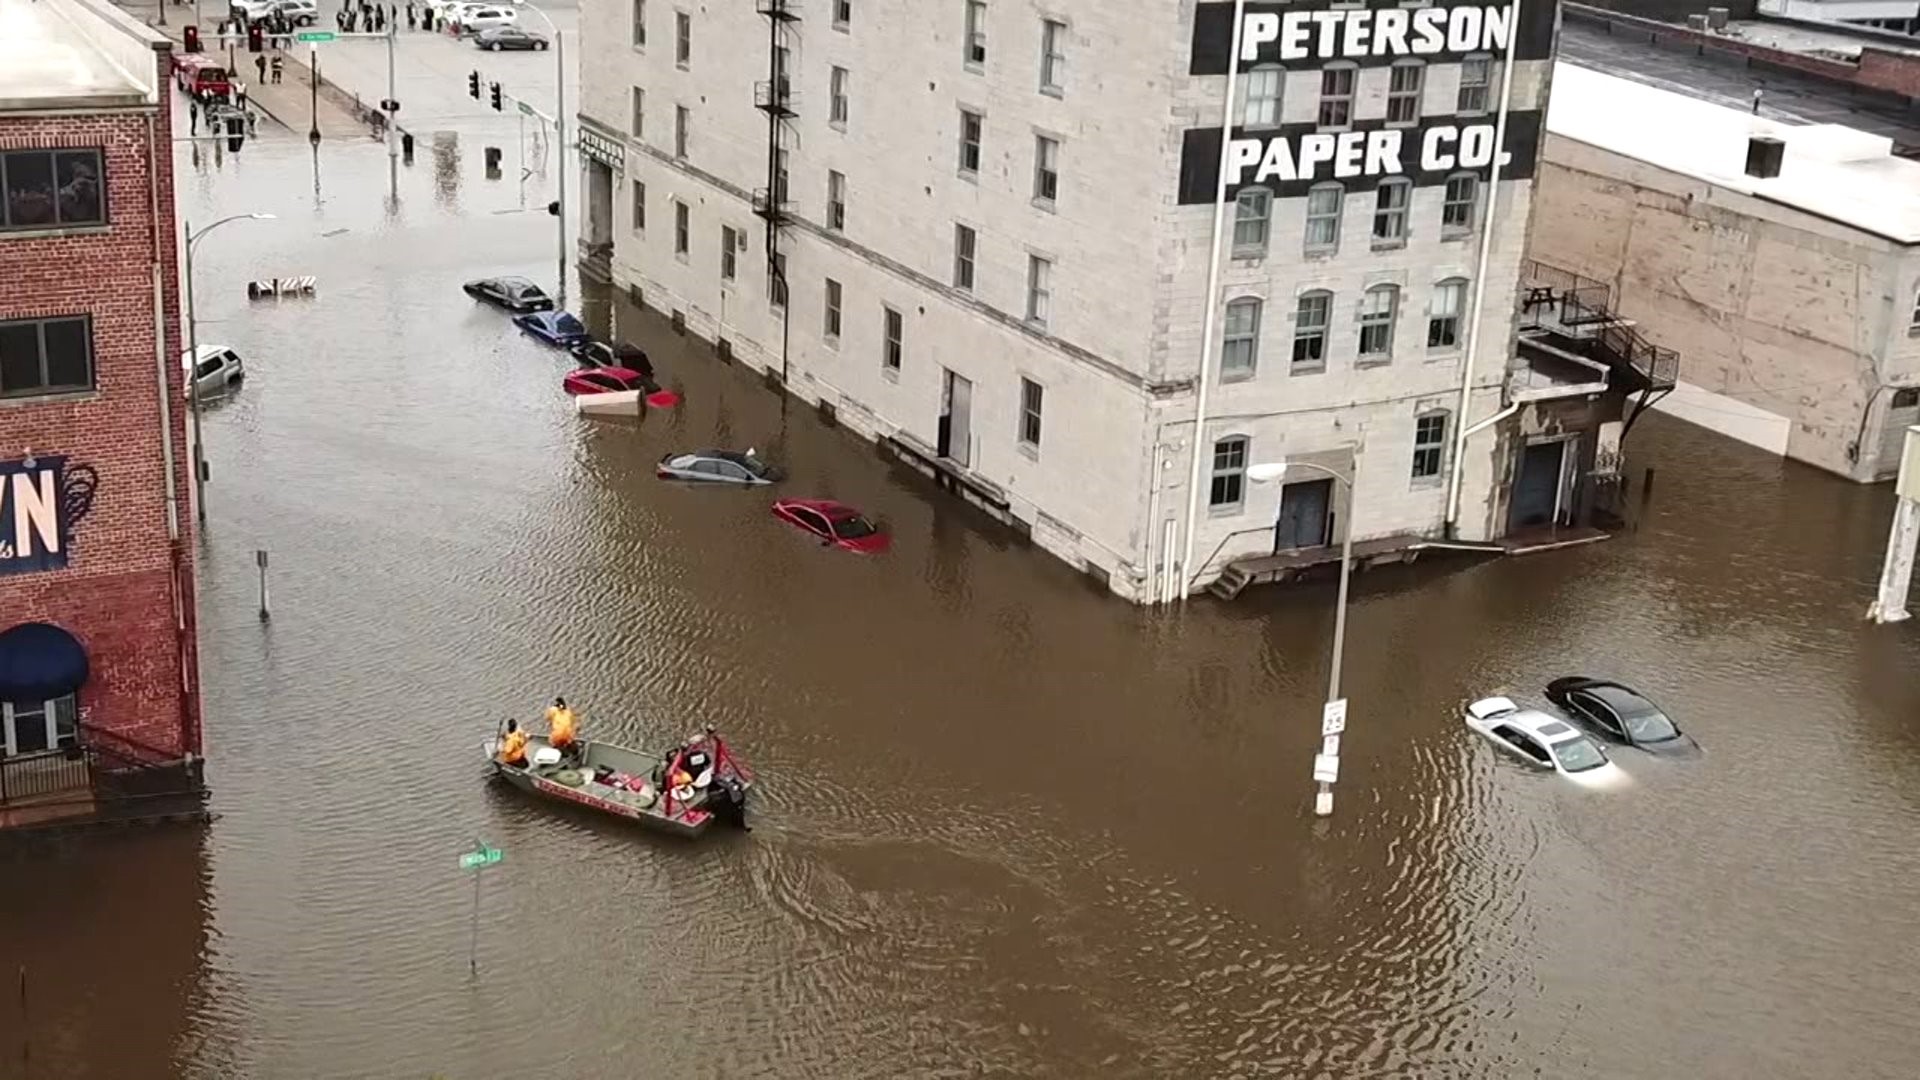 Looking back at 2019: Live coverage from the day the Davenport levee was breached